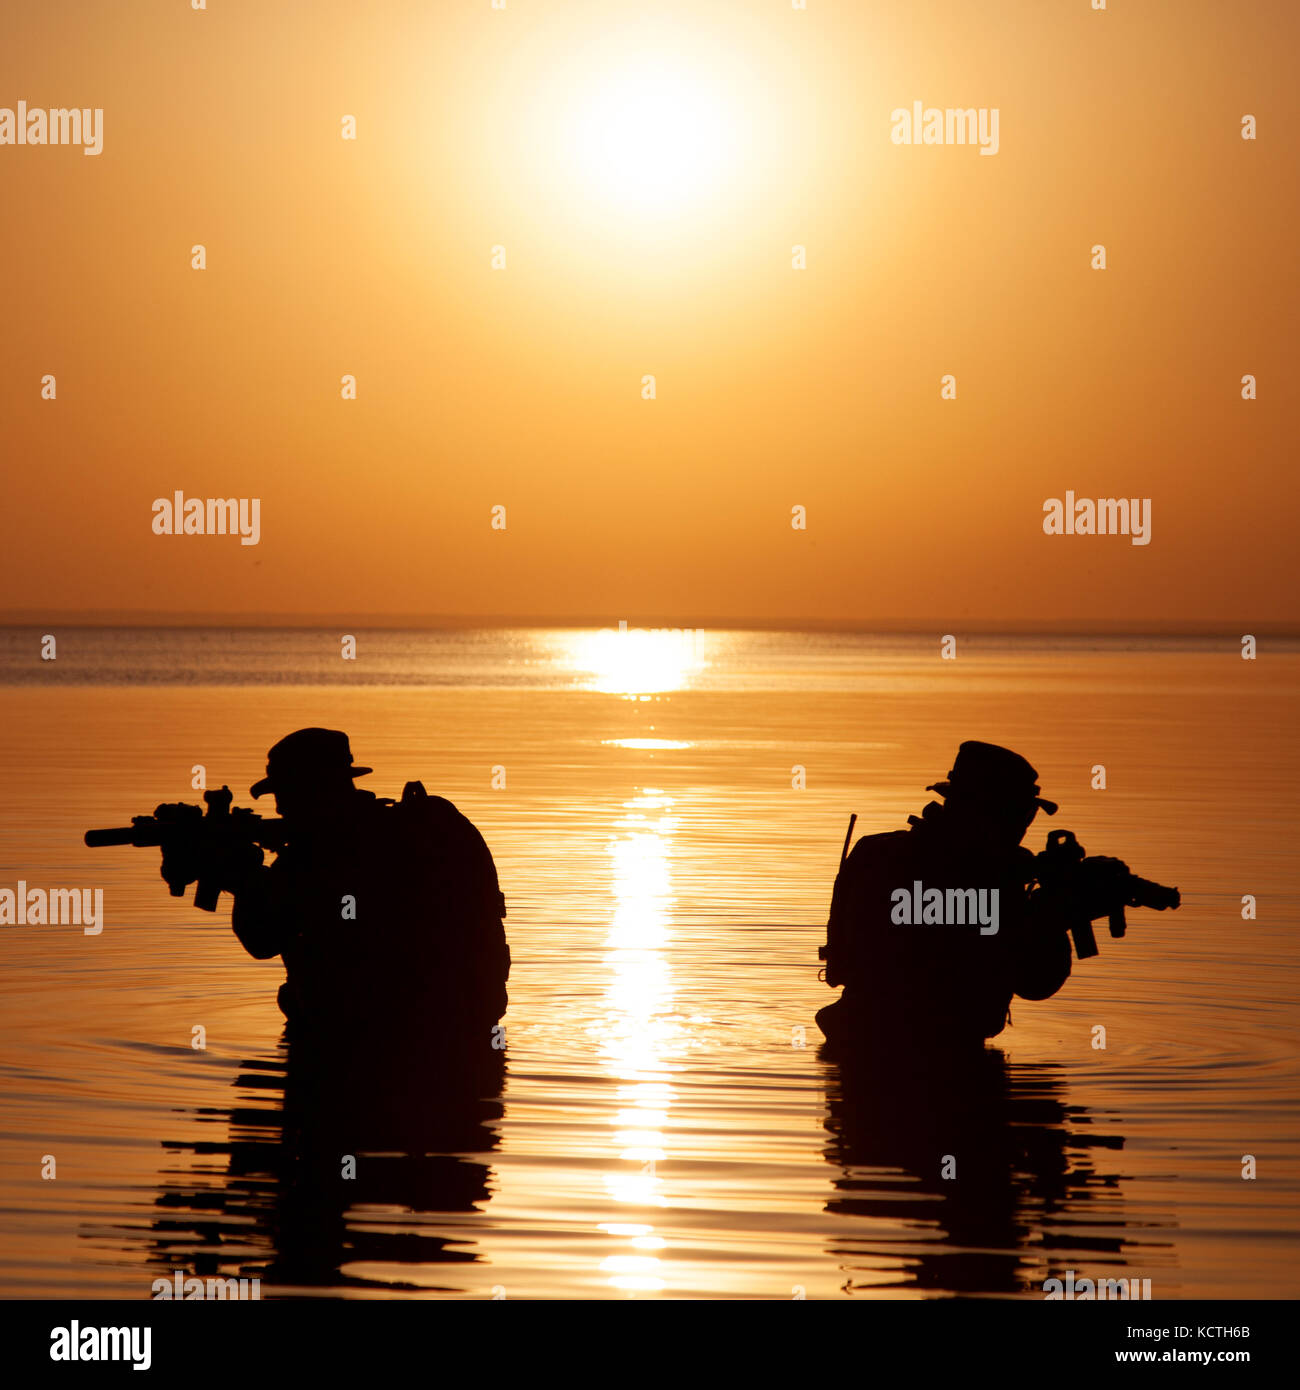 Army soldier silhouette Stock Photo